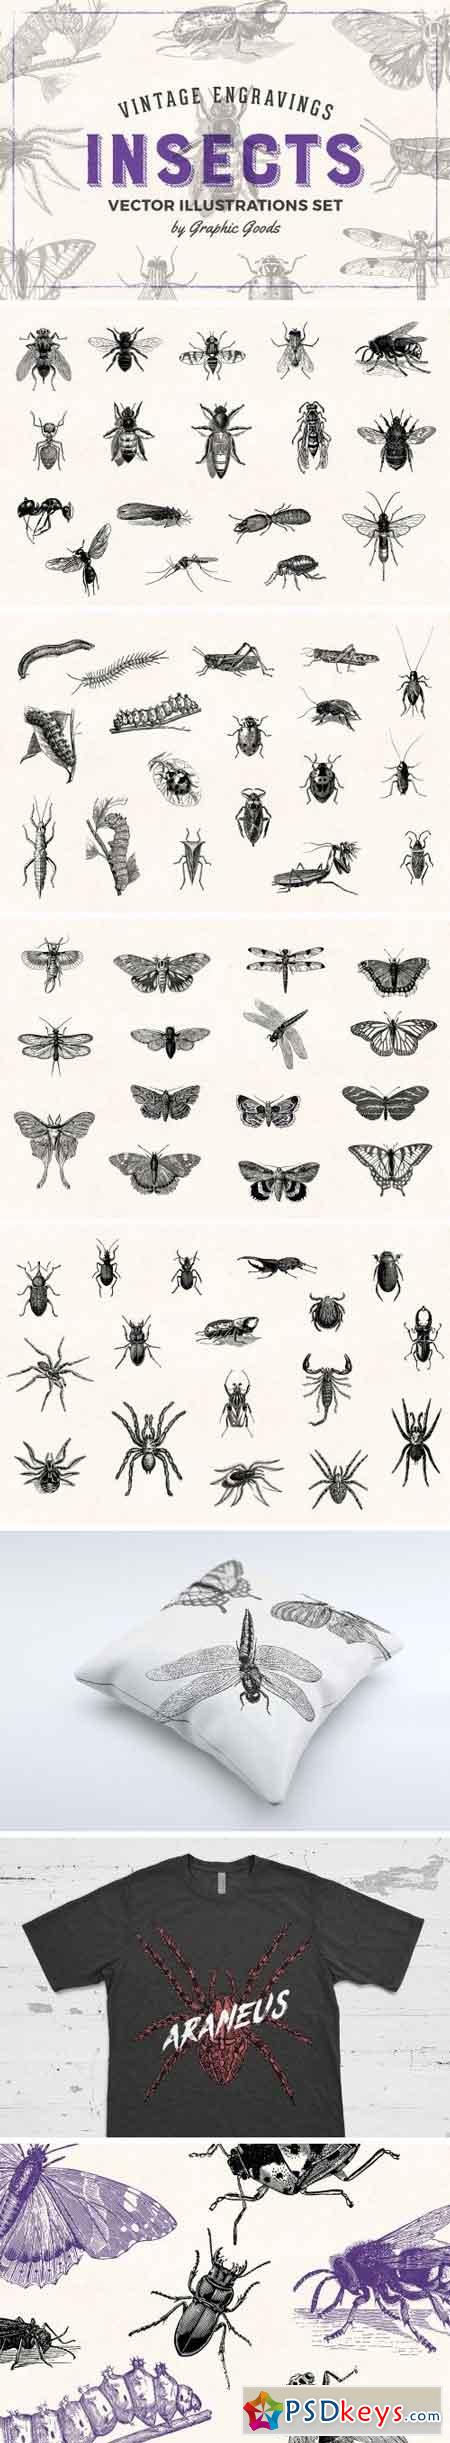 Insects - Vintage Illustrations 1452979